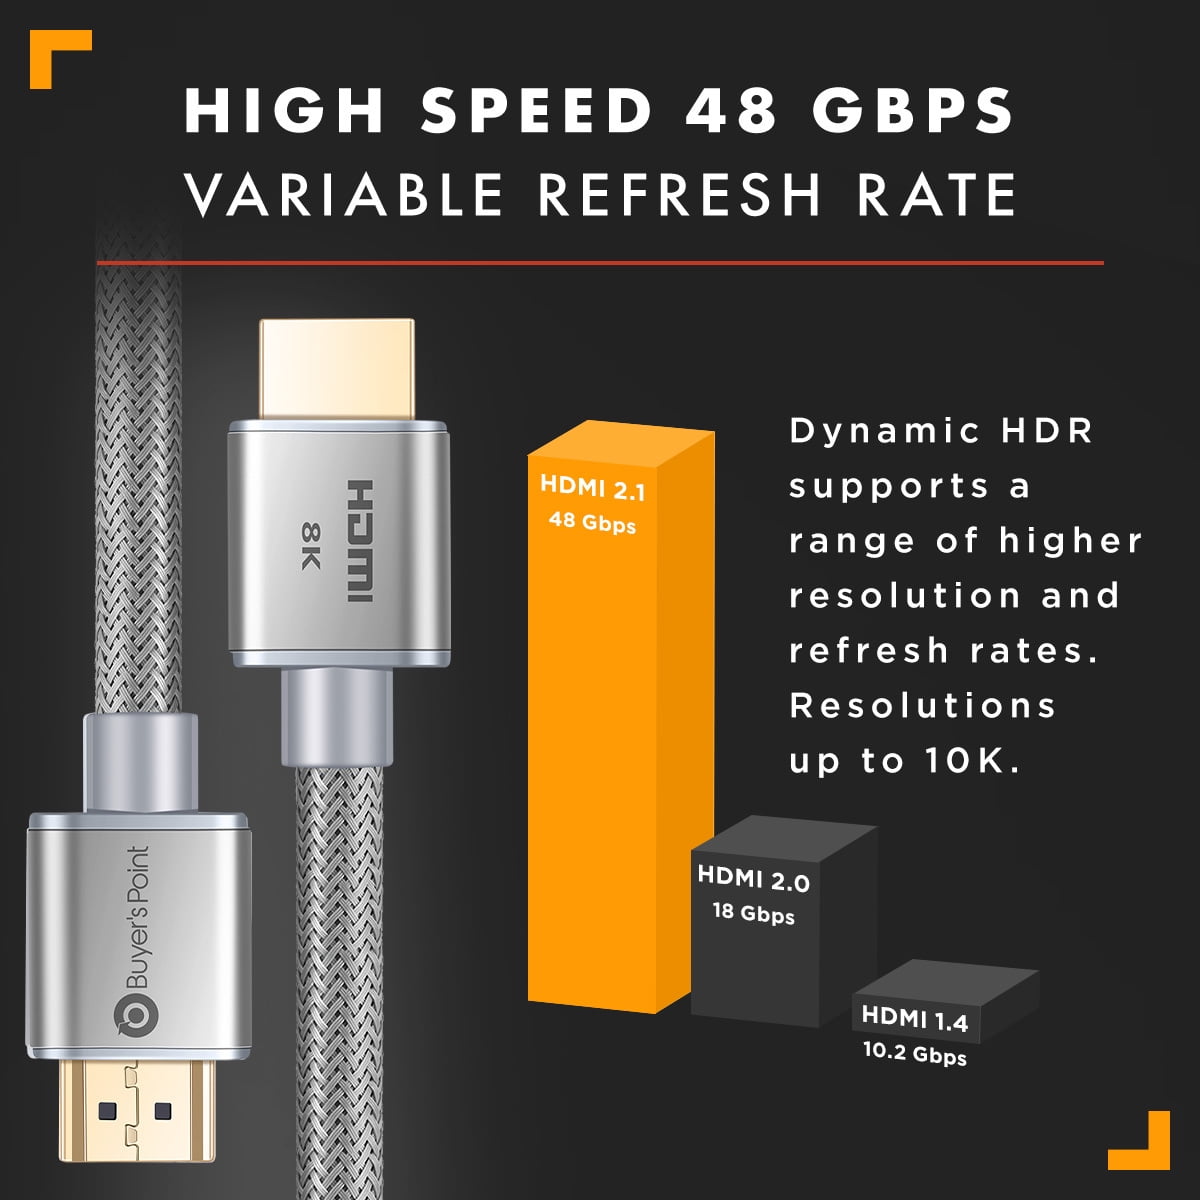 Buyer's Point 8K Ultra High Speed HDMI 2.1 Cable (6ft) with 120Hz